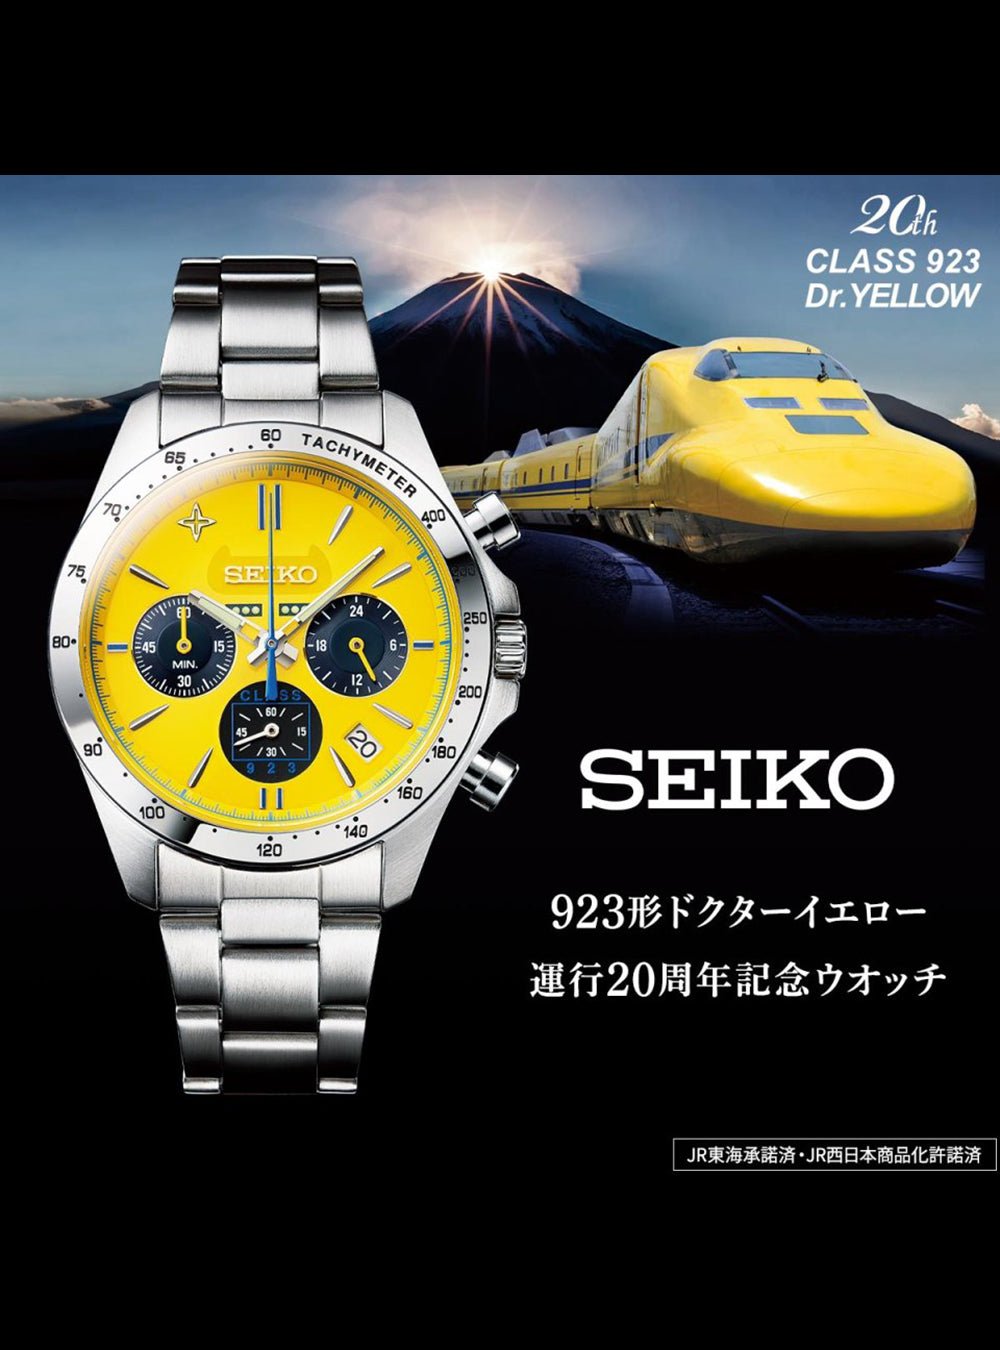 SEIKO × JR WEST 20TH ANNIVERSARY CLASS 923 DR.YELLOW MADE IN JAPAN LIMITED  EDITION